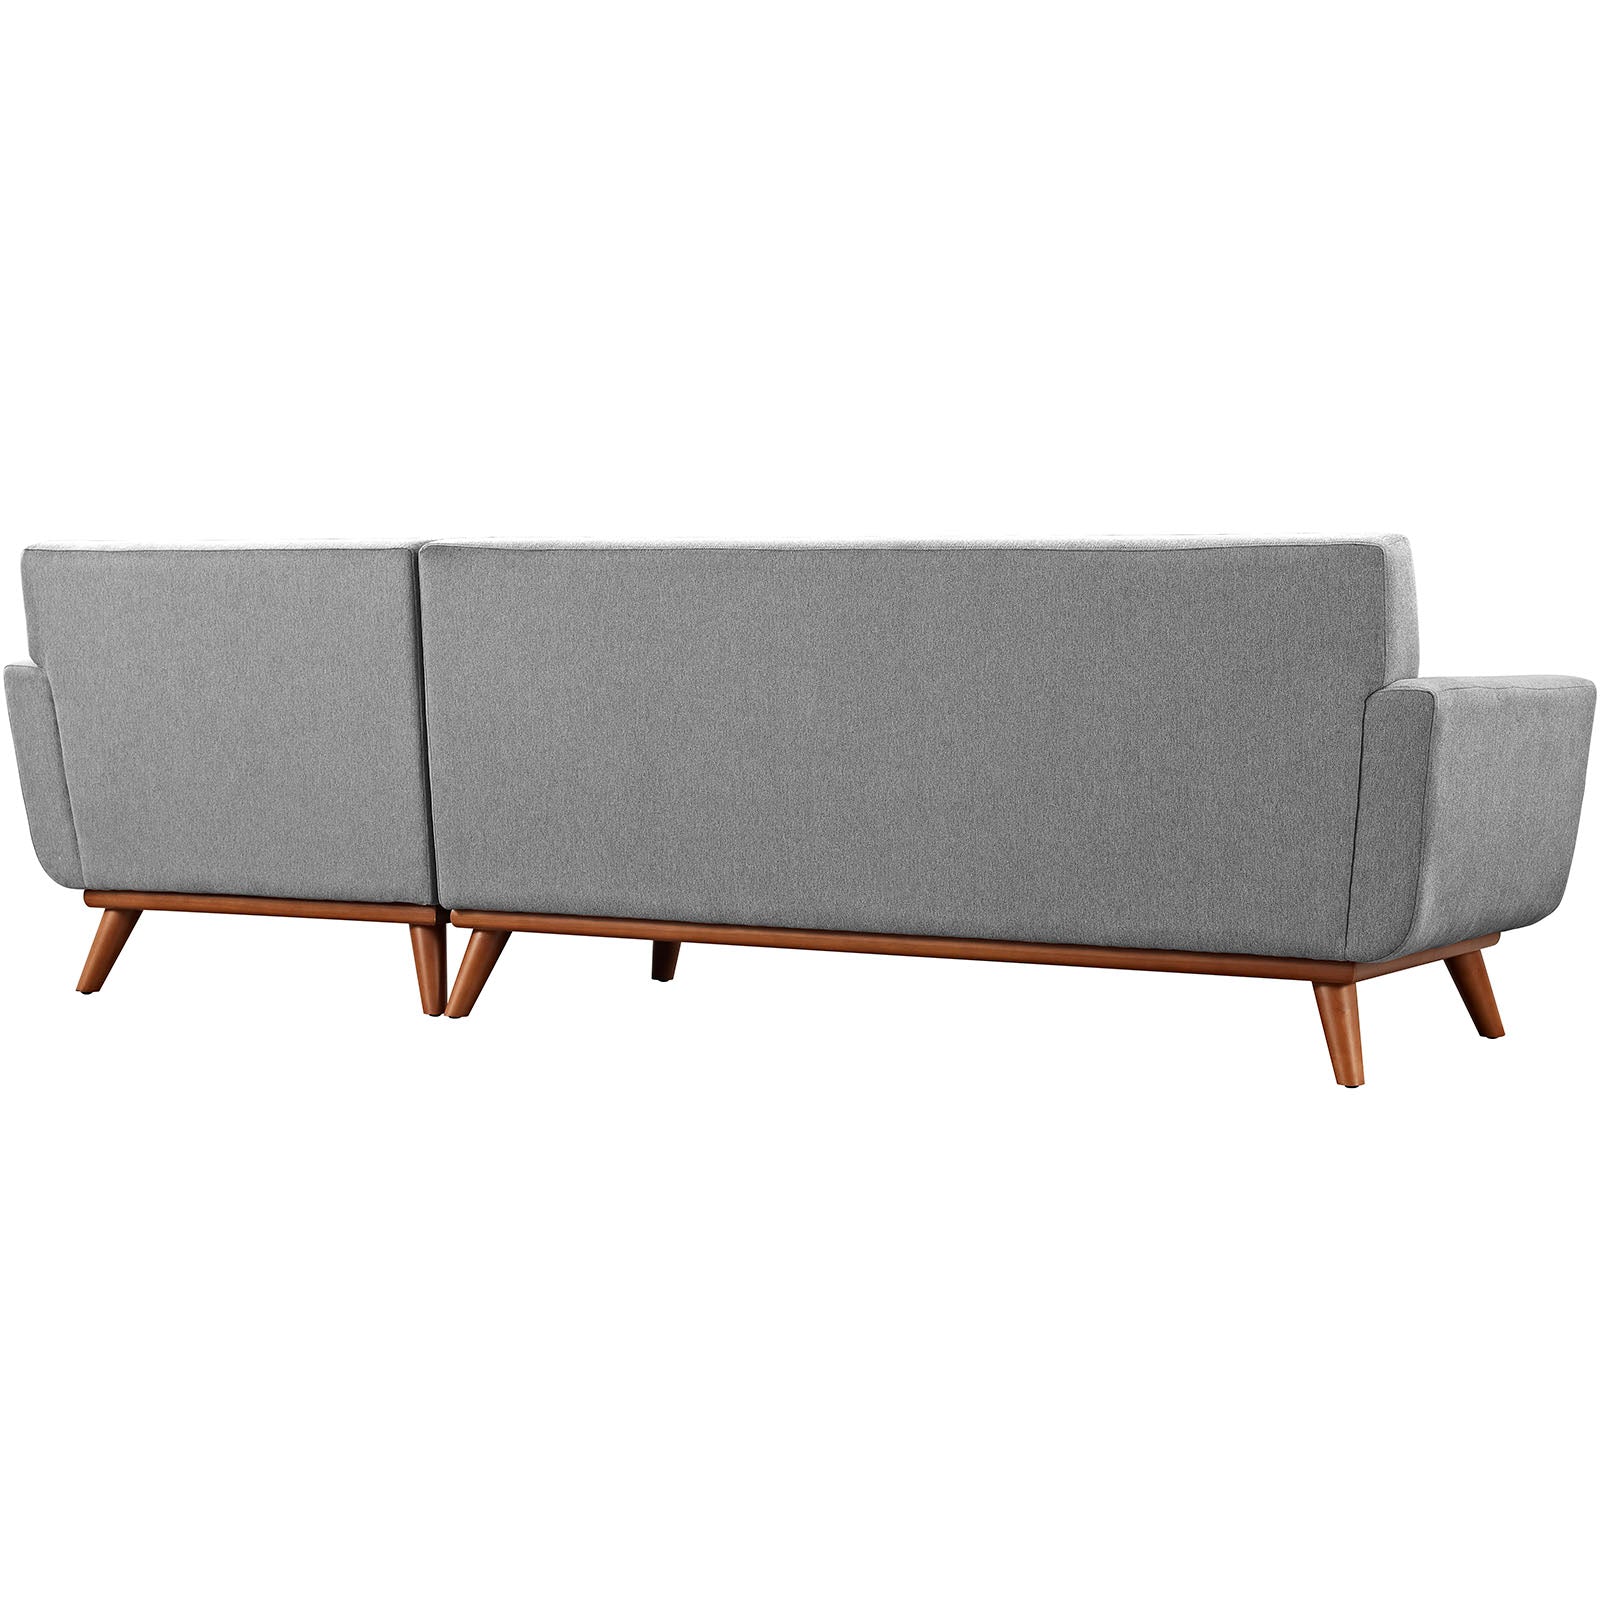 Modway Sectional Sofas - Engage Right-Facing Sectional Sofa Gray